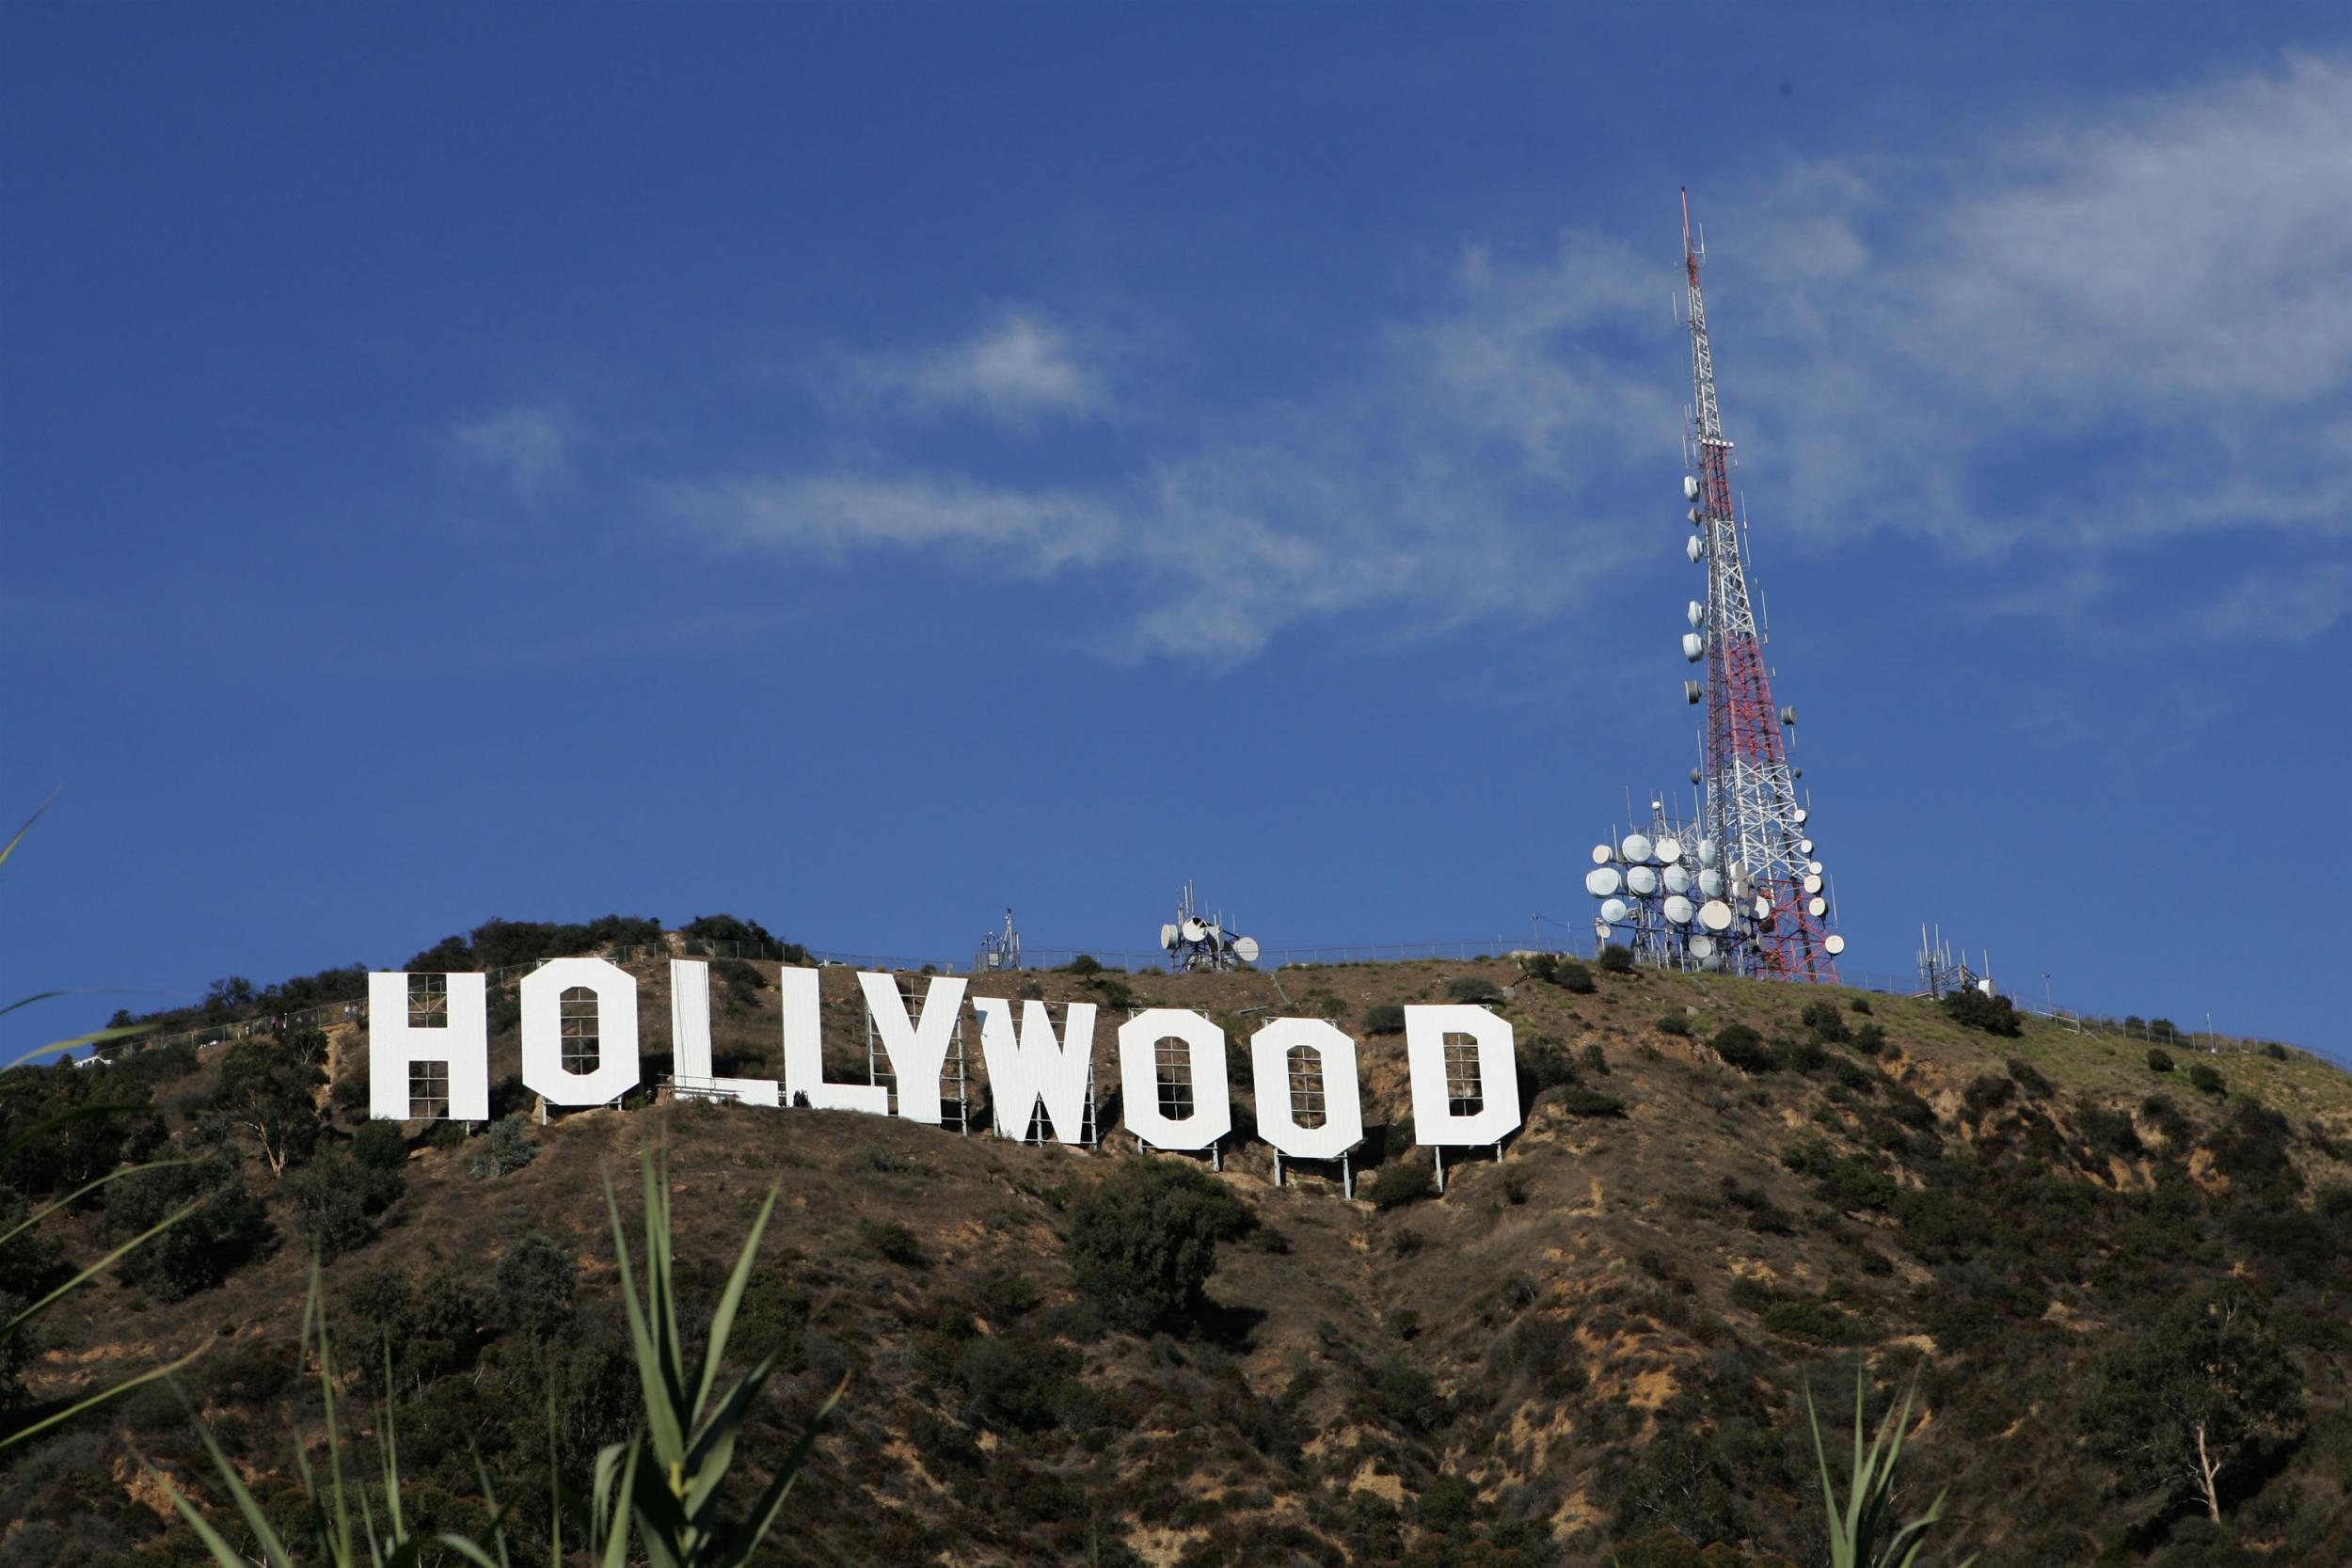 Los Angeles is more than its glittering showbiz side